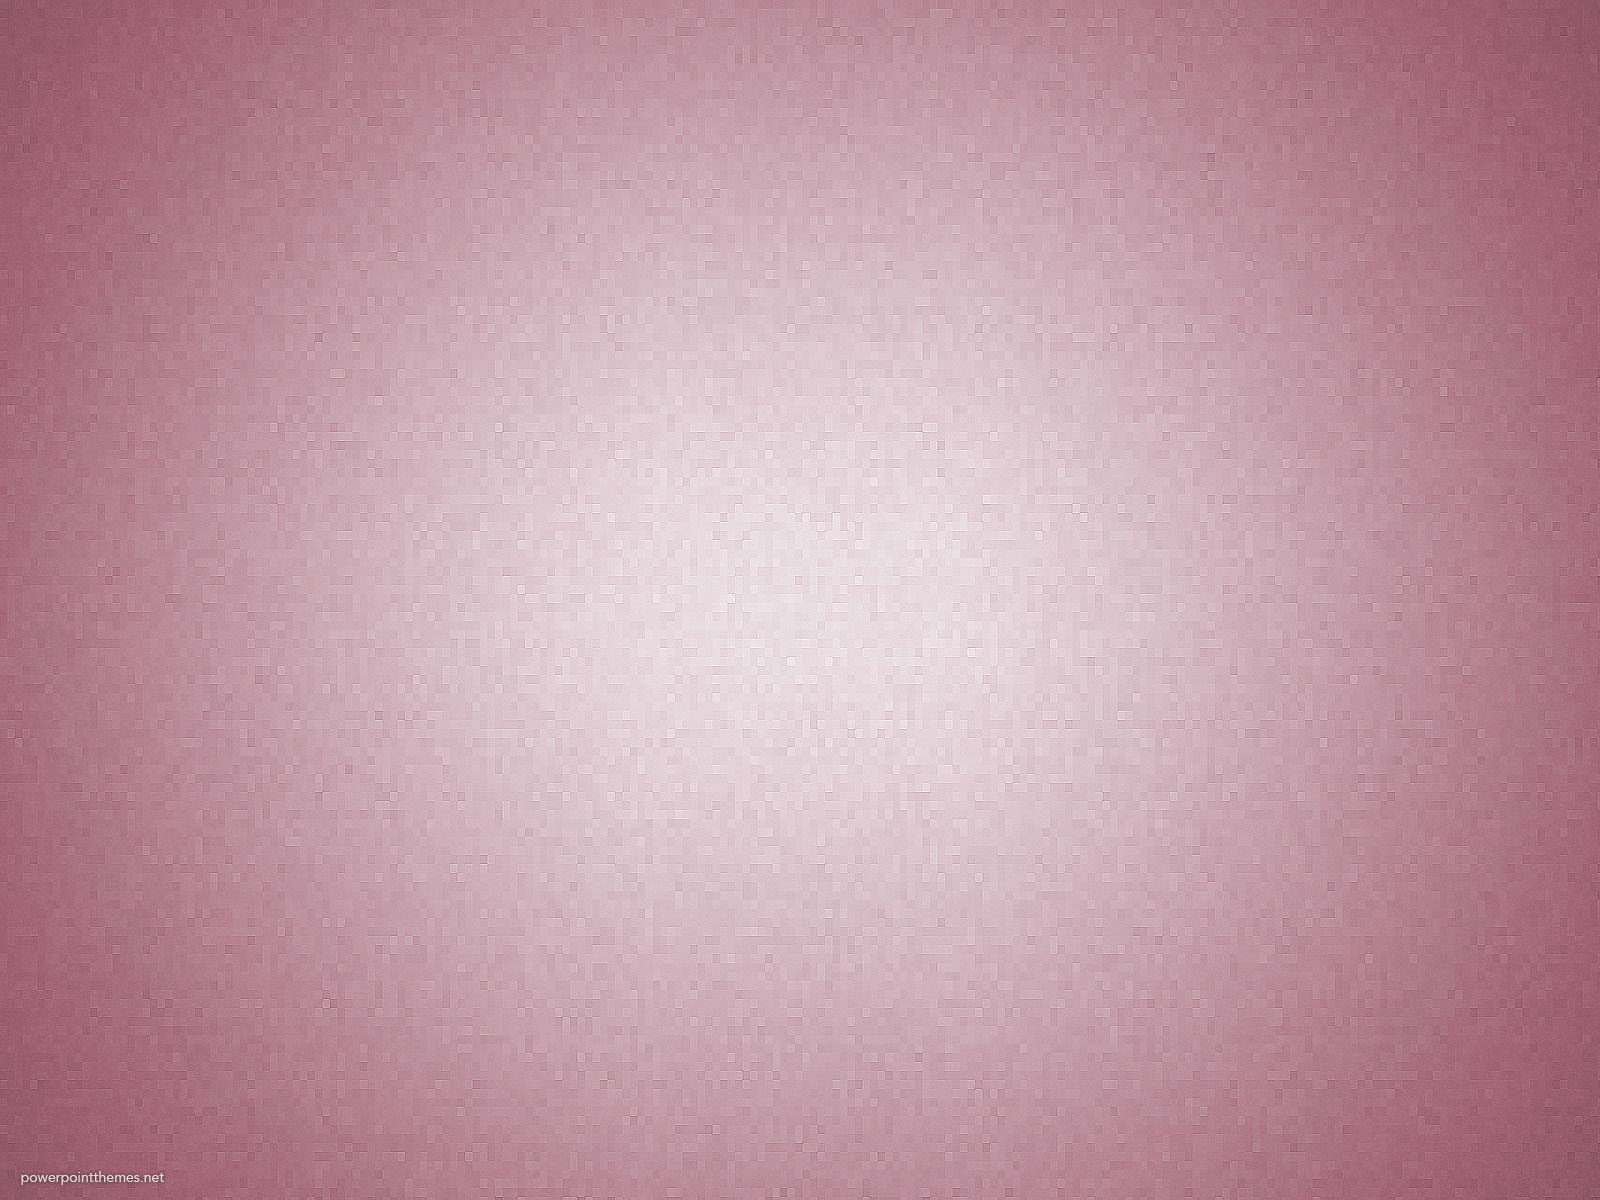 Soft Pink Background Powerpoint Themes